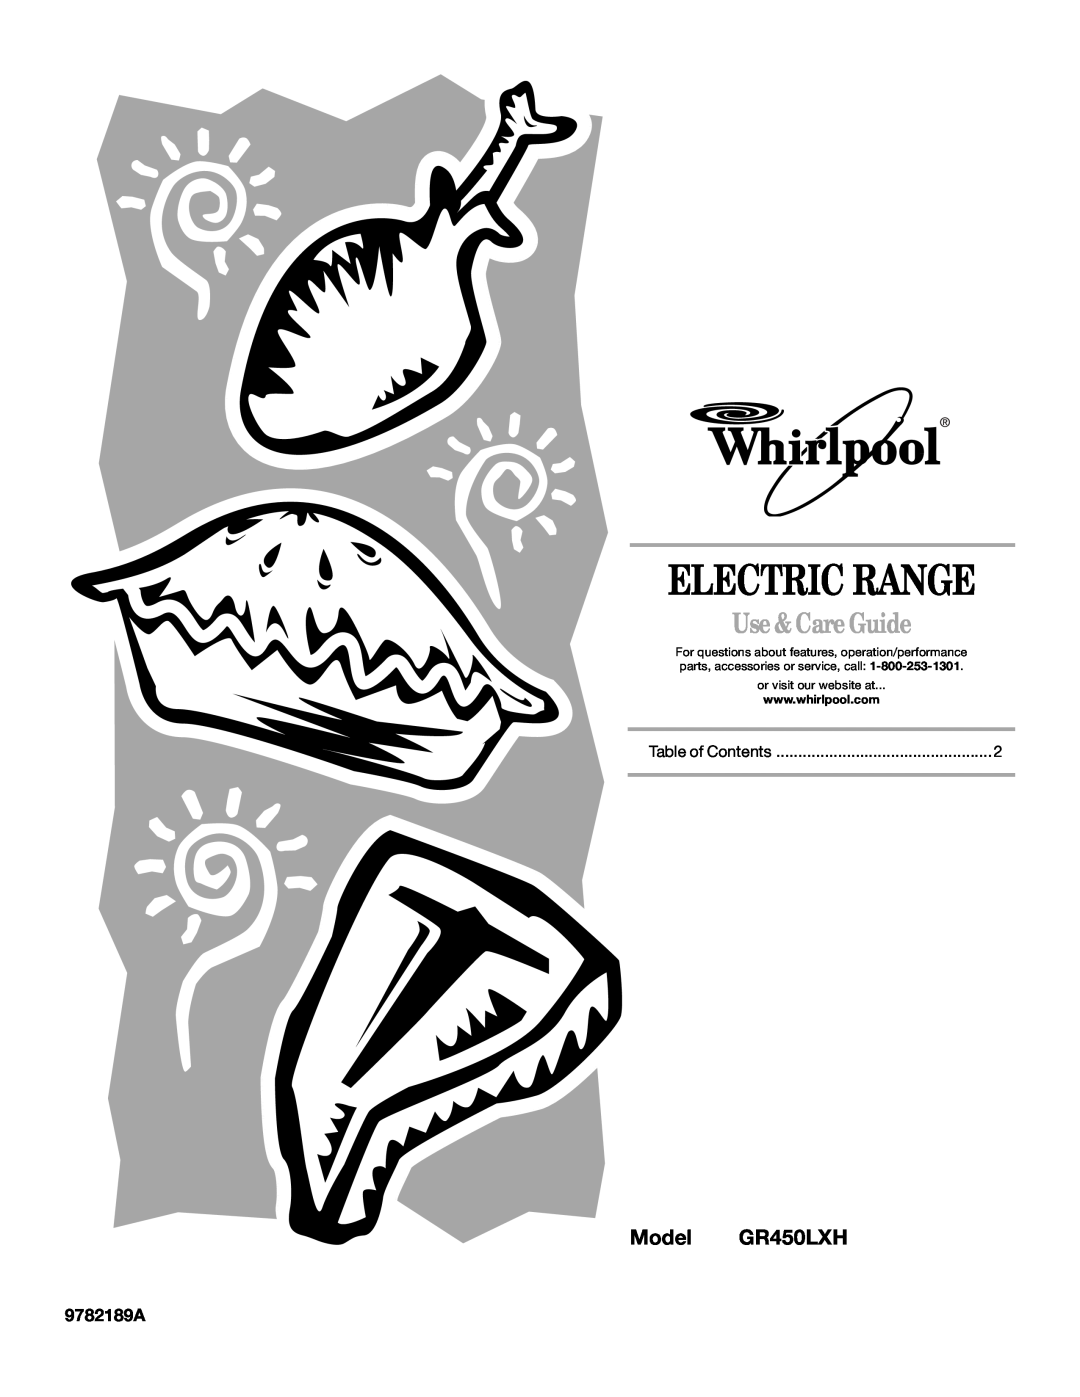 Whirlpool manual Electric Range, Use & Care Guide, 9782189A, Model GR450LXH, or visit our website at 